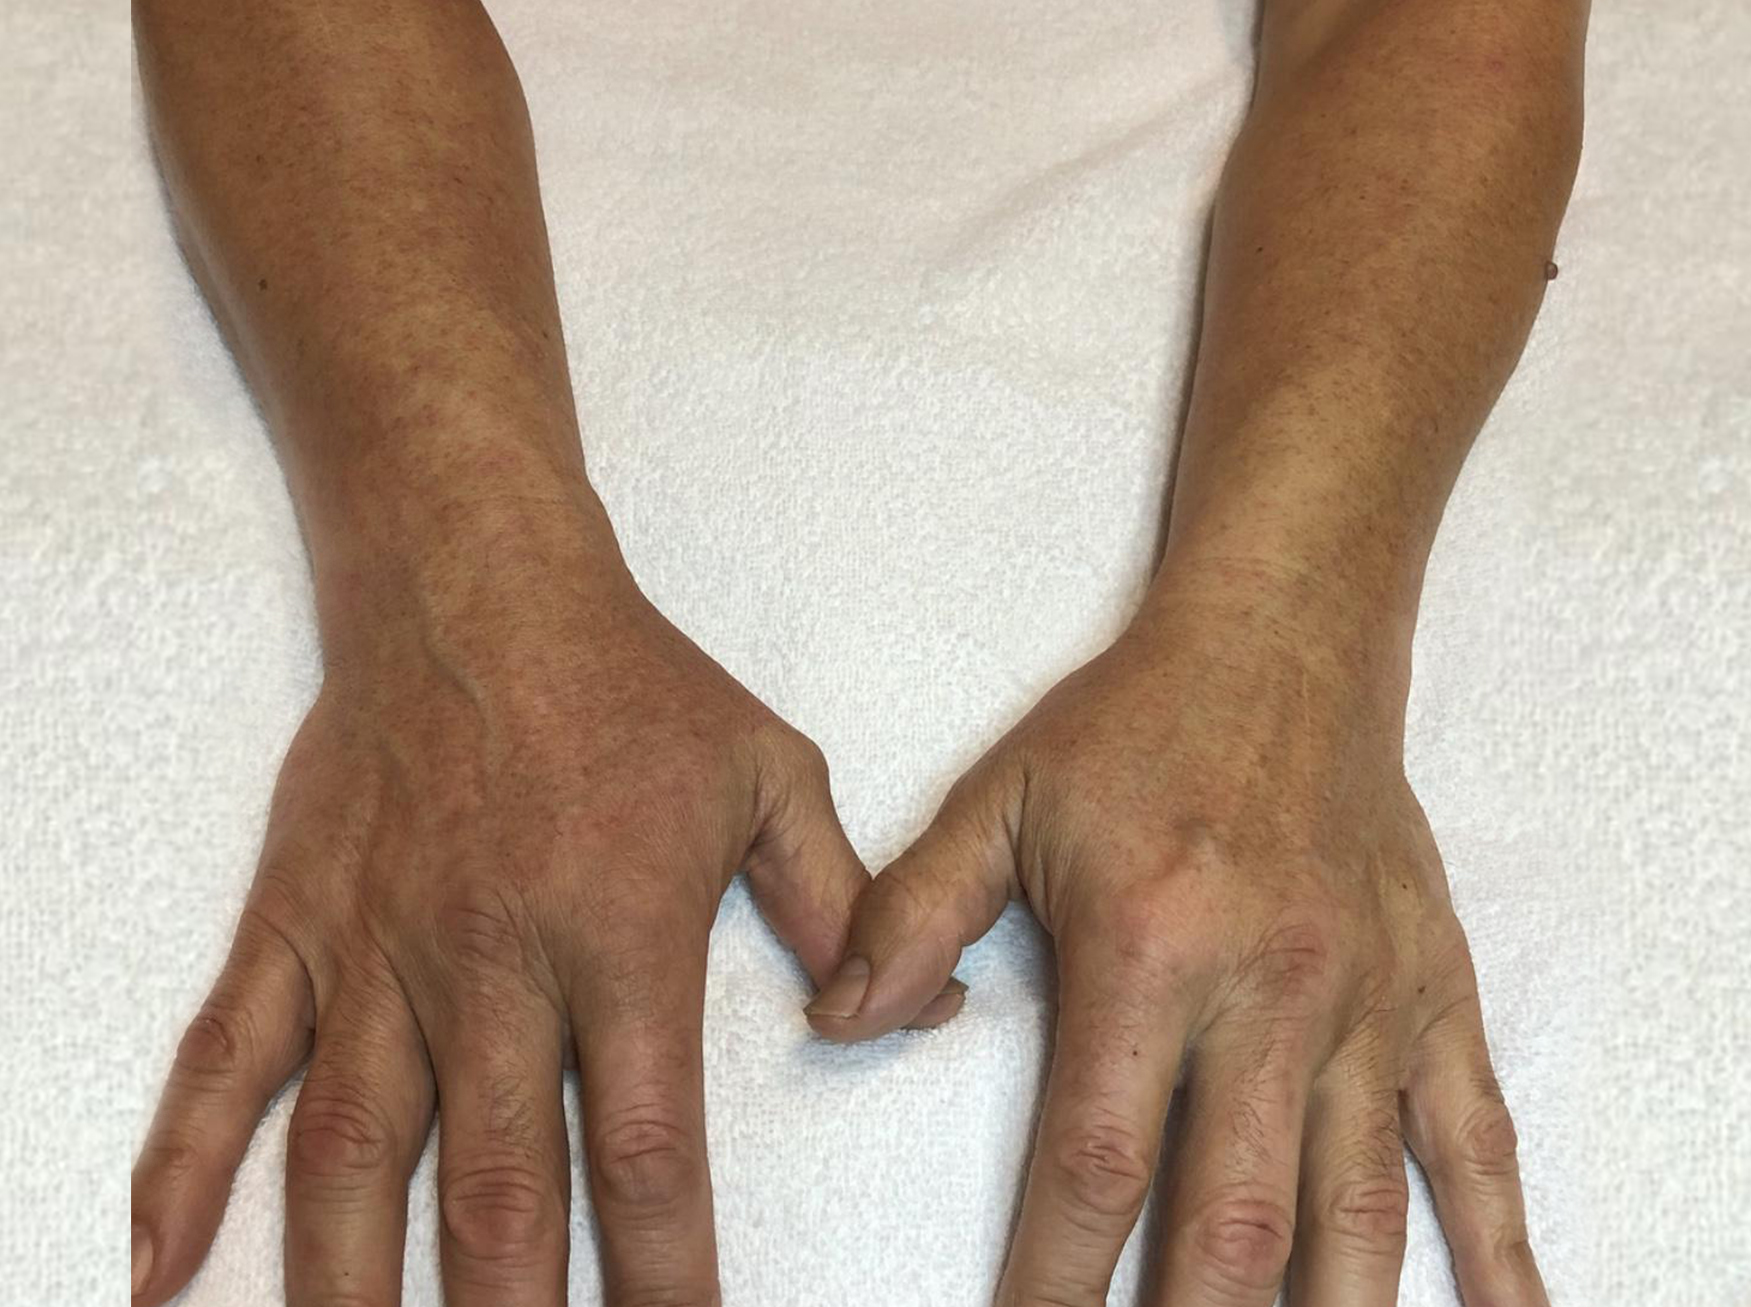 A mans arms after sugaring